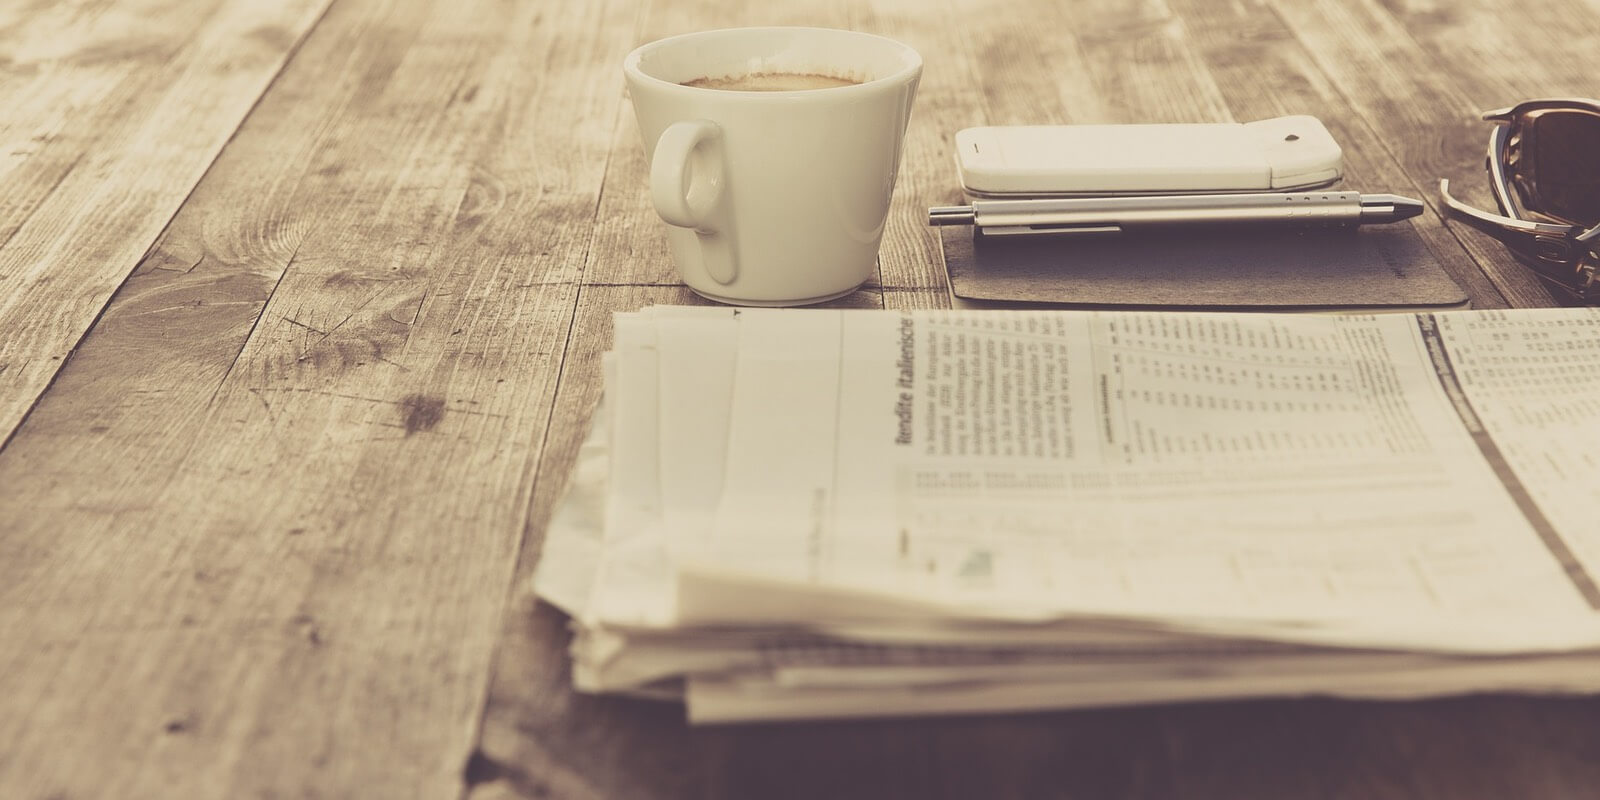 A newspaper, sits on a table next to a cup of coffee, a phone, a pen and a pair of sunglasses.